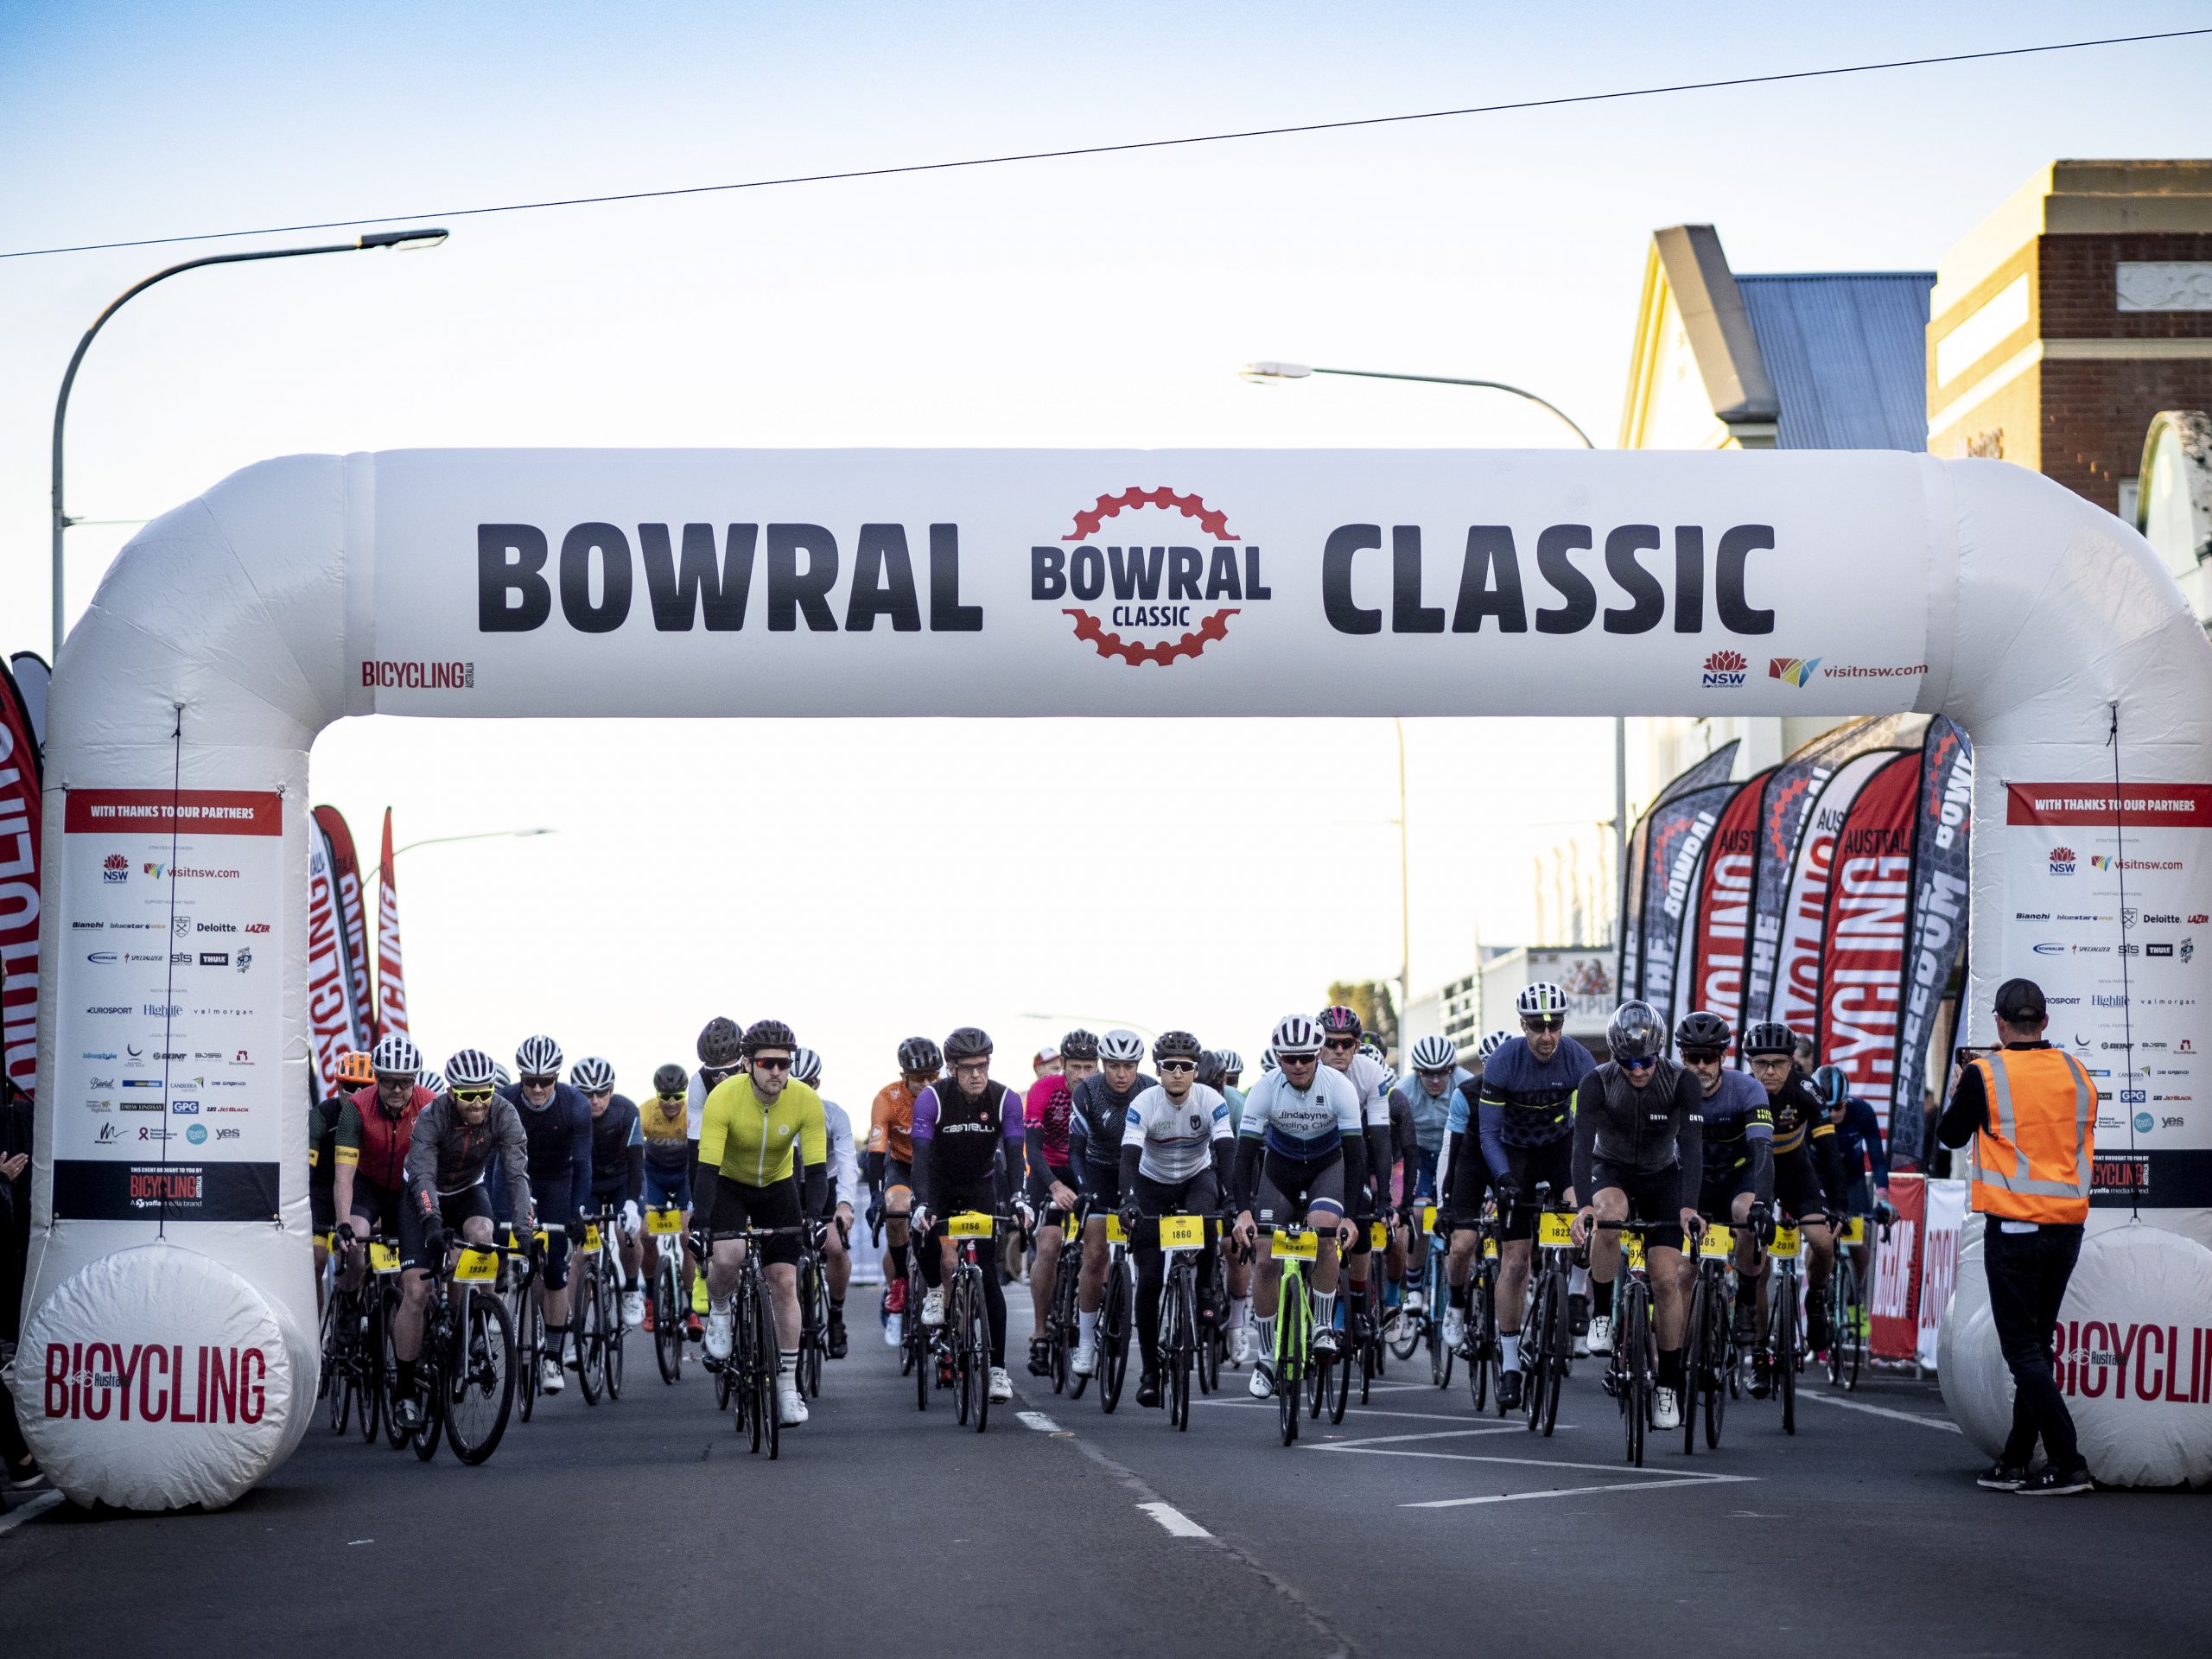 Bigger, bolder, better 2020 Bowral Classic officially launched